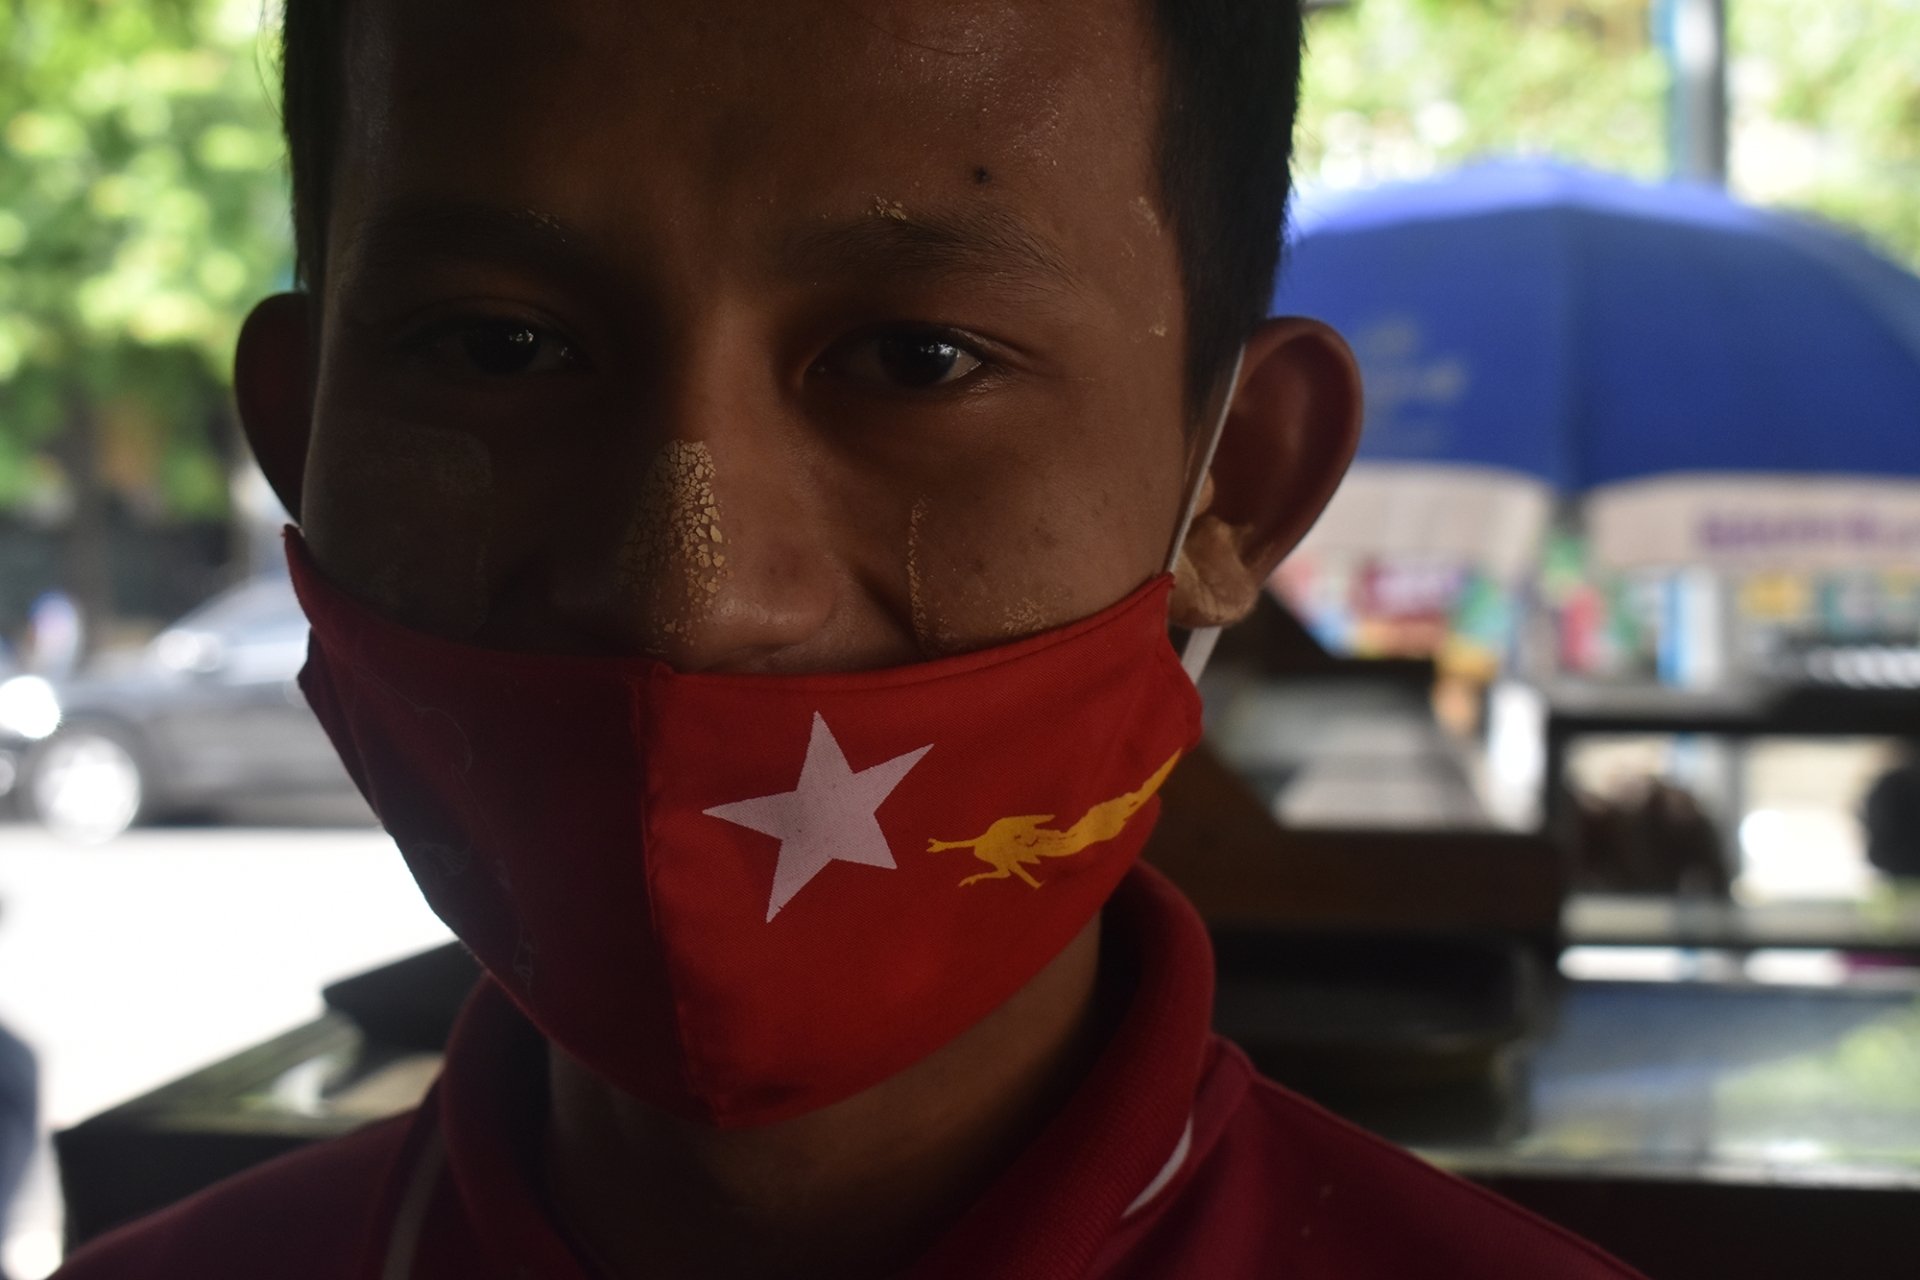 A man with a red face mask that has a white star and a gold peacock, the symbols of the NLD.